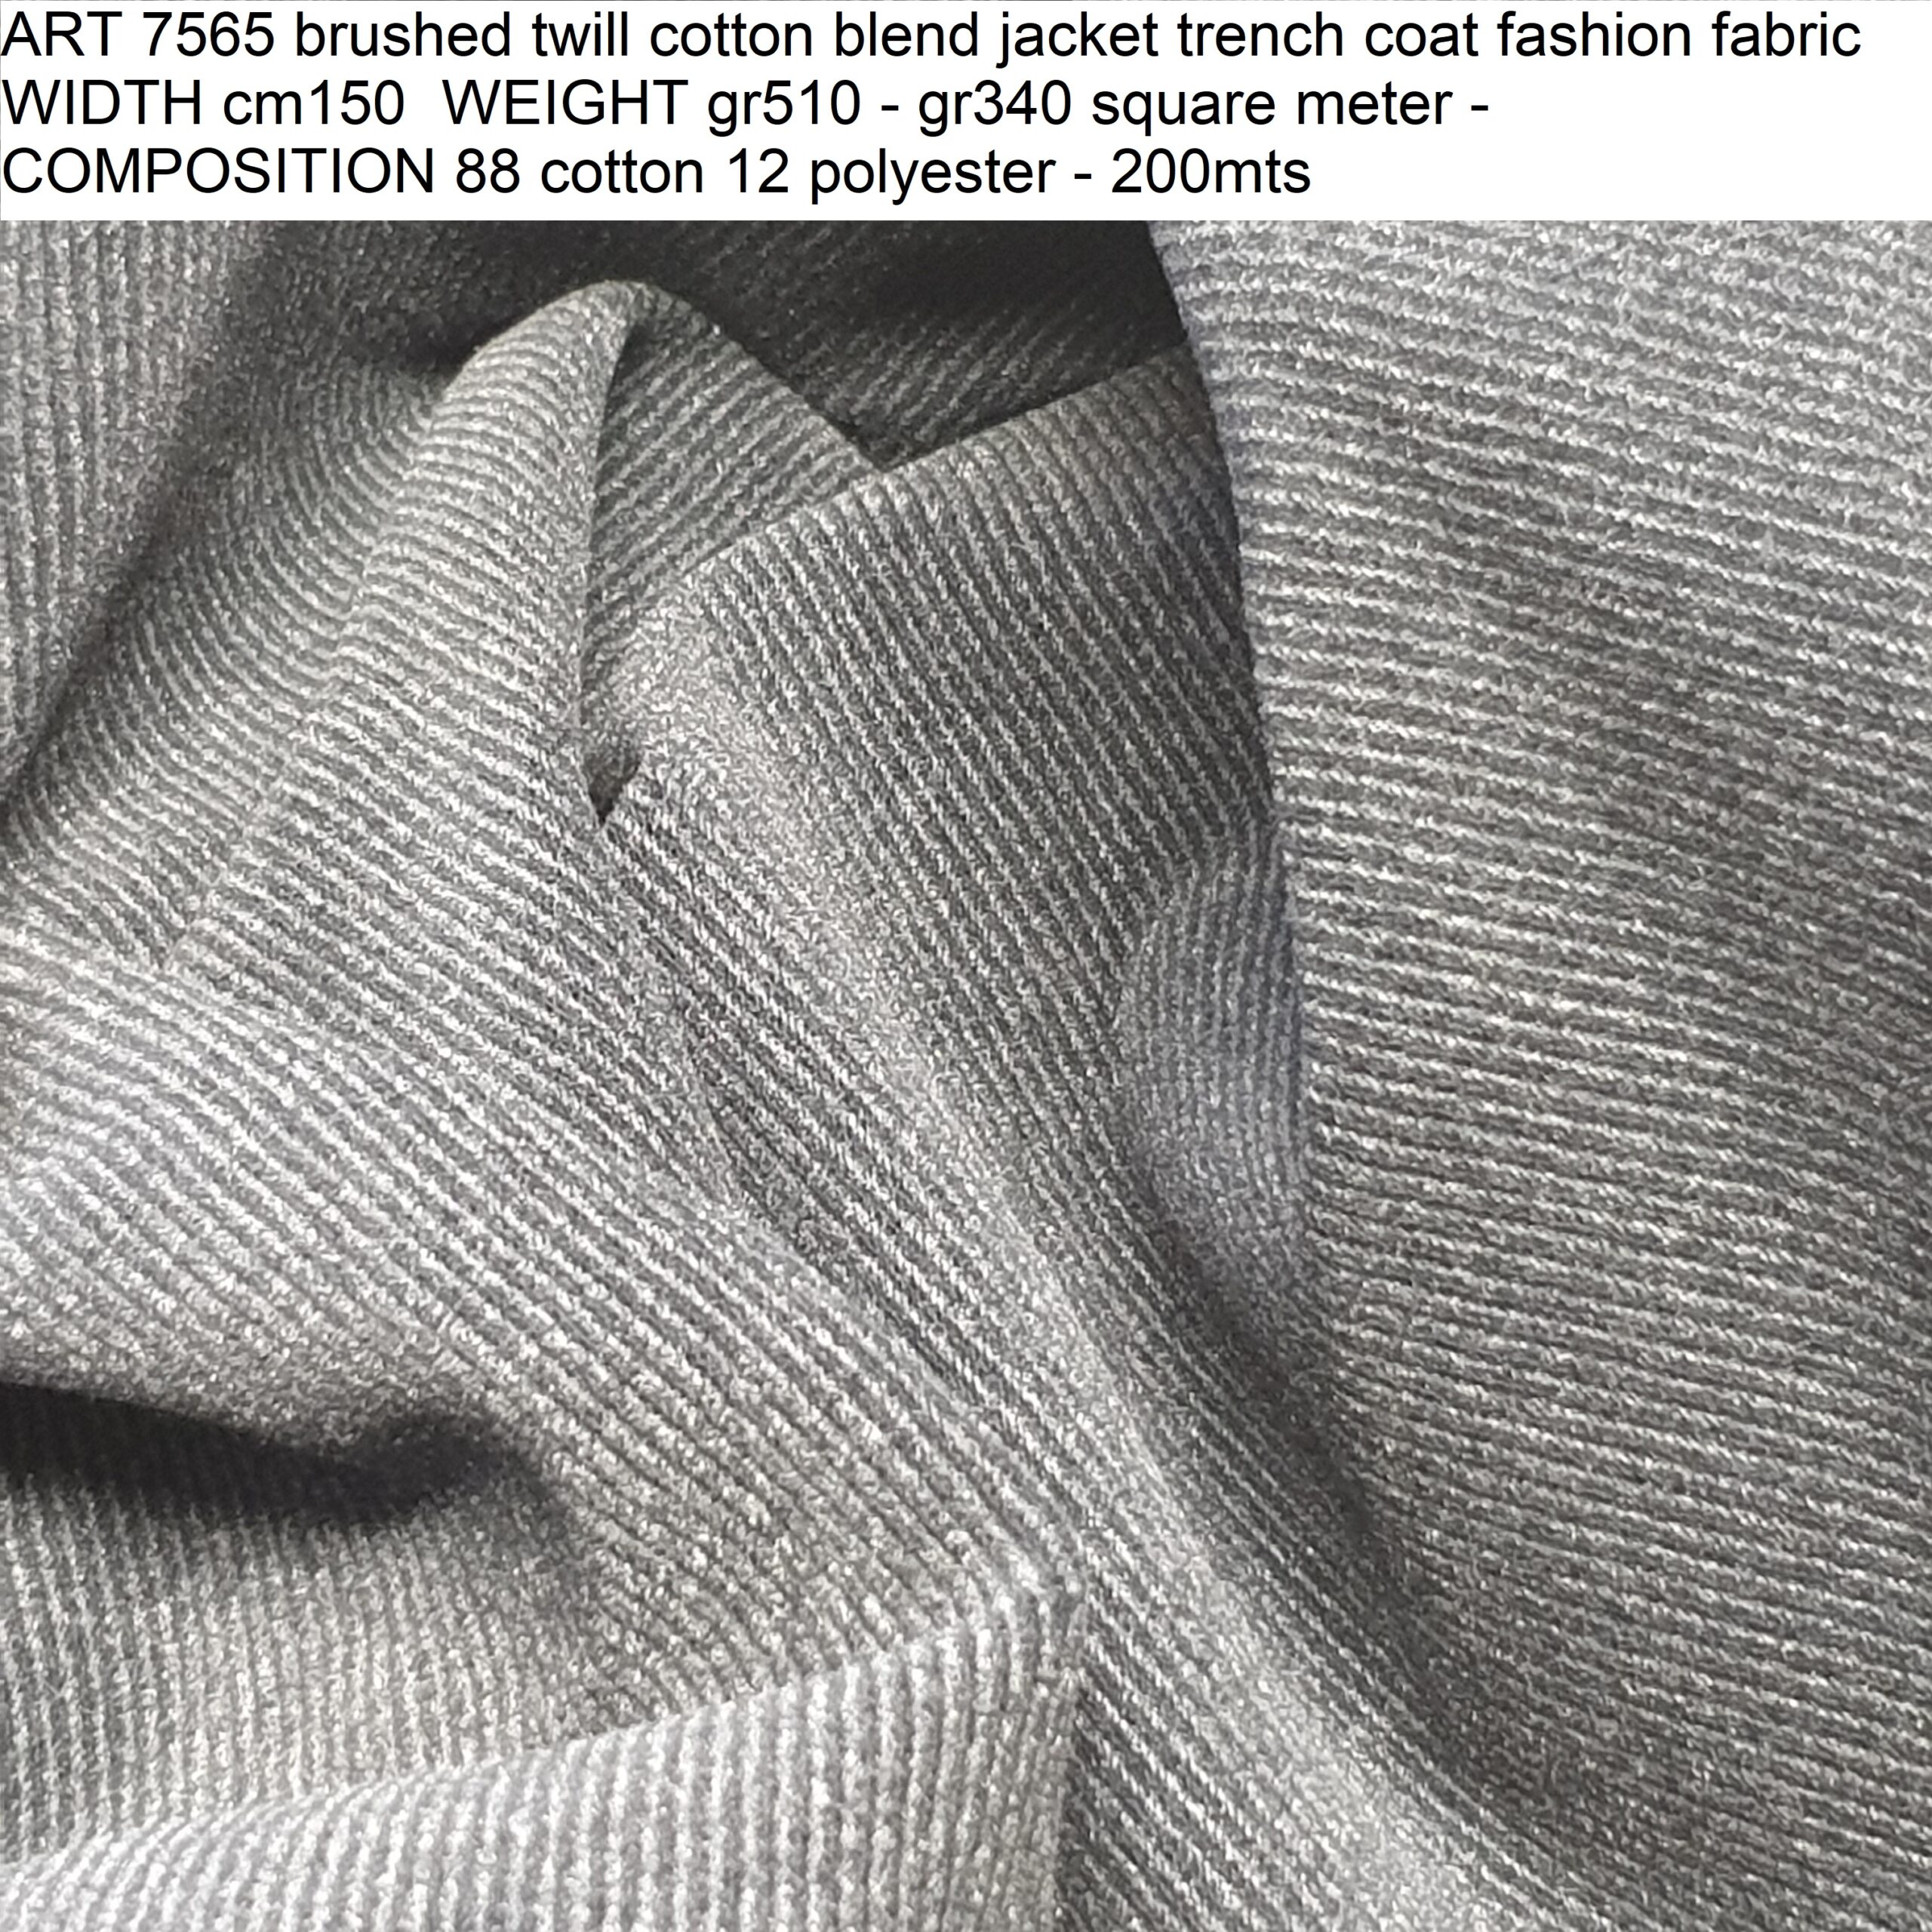 https://www.mystoxx.it/mystoxx/wp-content/uploads/2019/12/ART-7565-brushed-twill-cotton-blend-jacket-trench-coat-fashion-fabric-WIDTH-cm150-WEIGHT-gr510-gr340-square-meter-COMPOSITION-88-cotton-12-polyester-200mts-scaled.jpg